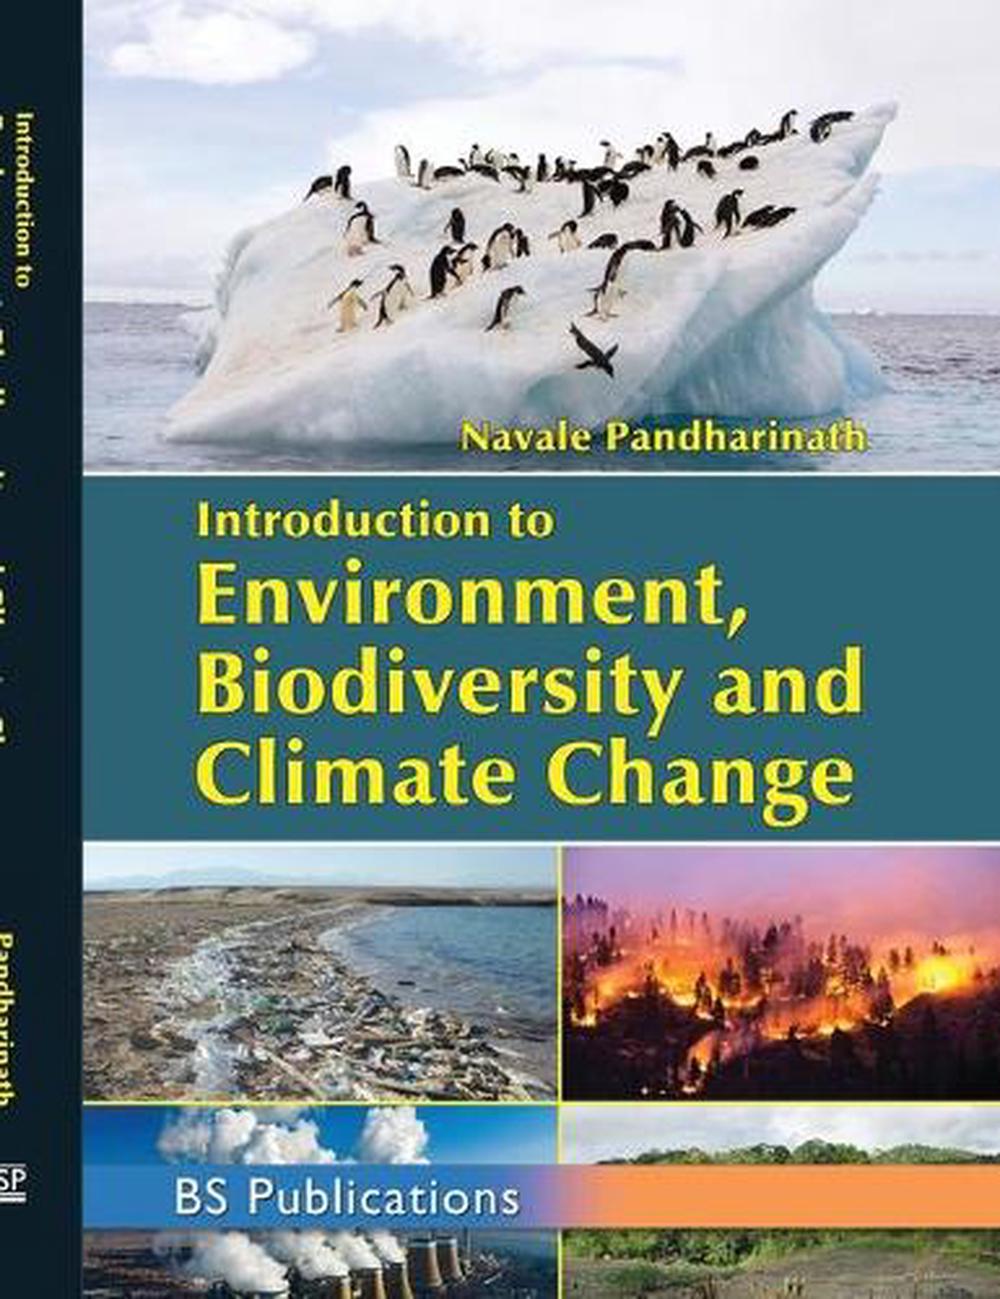 biodiversity and climate change essay